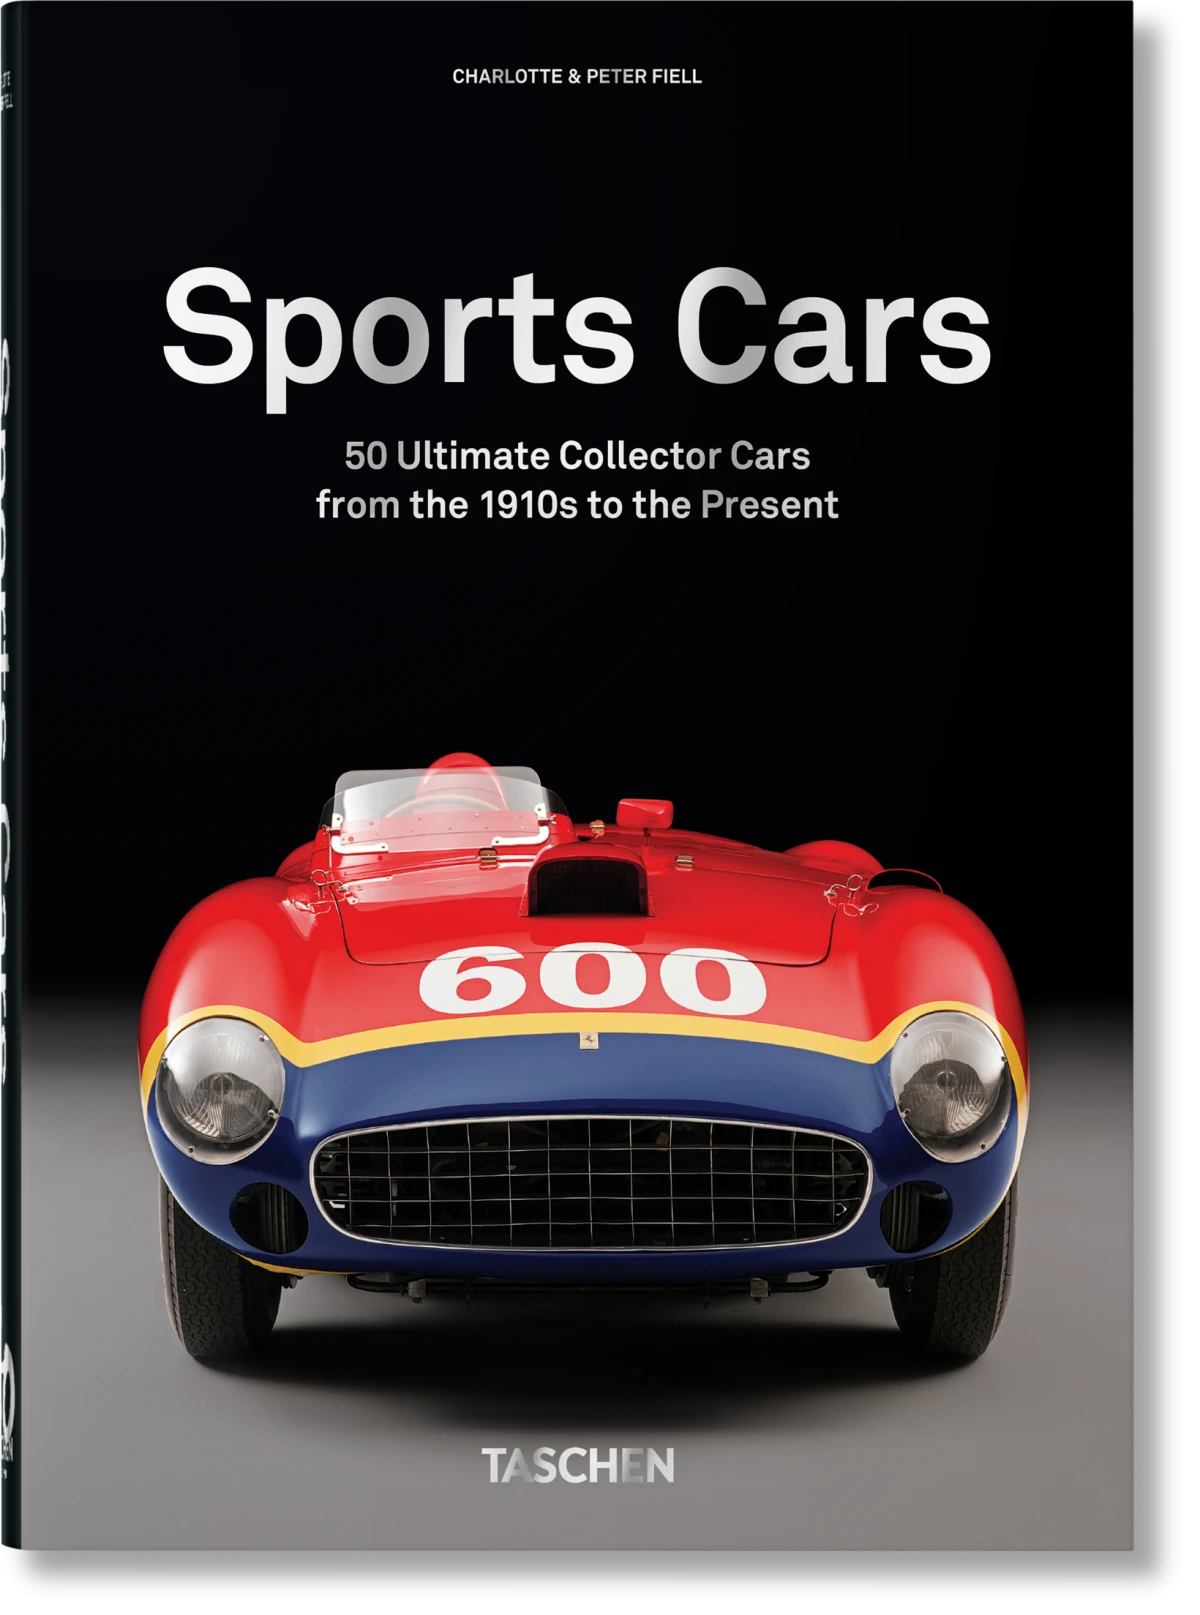 50 Ultimate Sports Cars. 40th Ed.